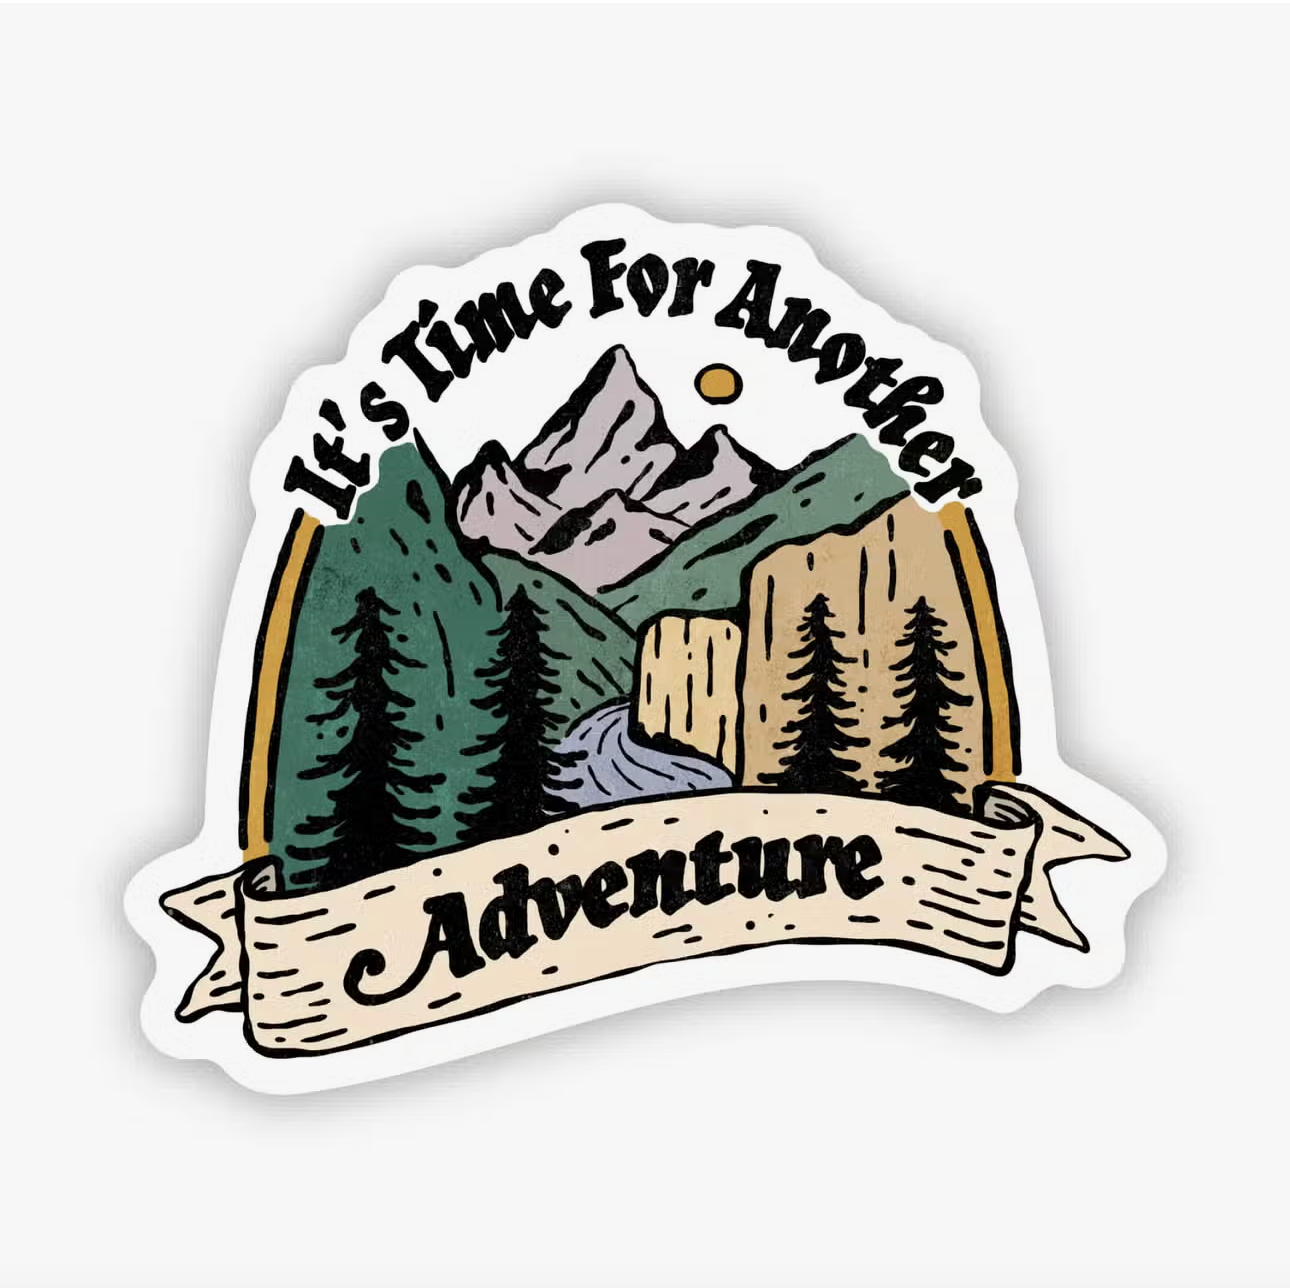 "It's Time For Another Adventure" Vinyl Sticker - Heart of the Home LV